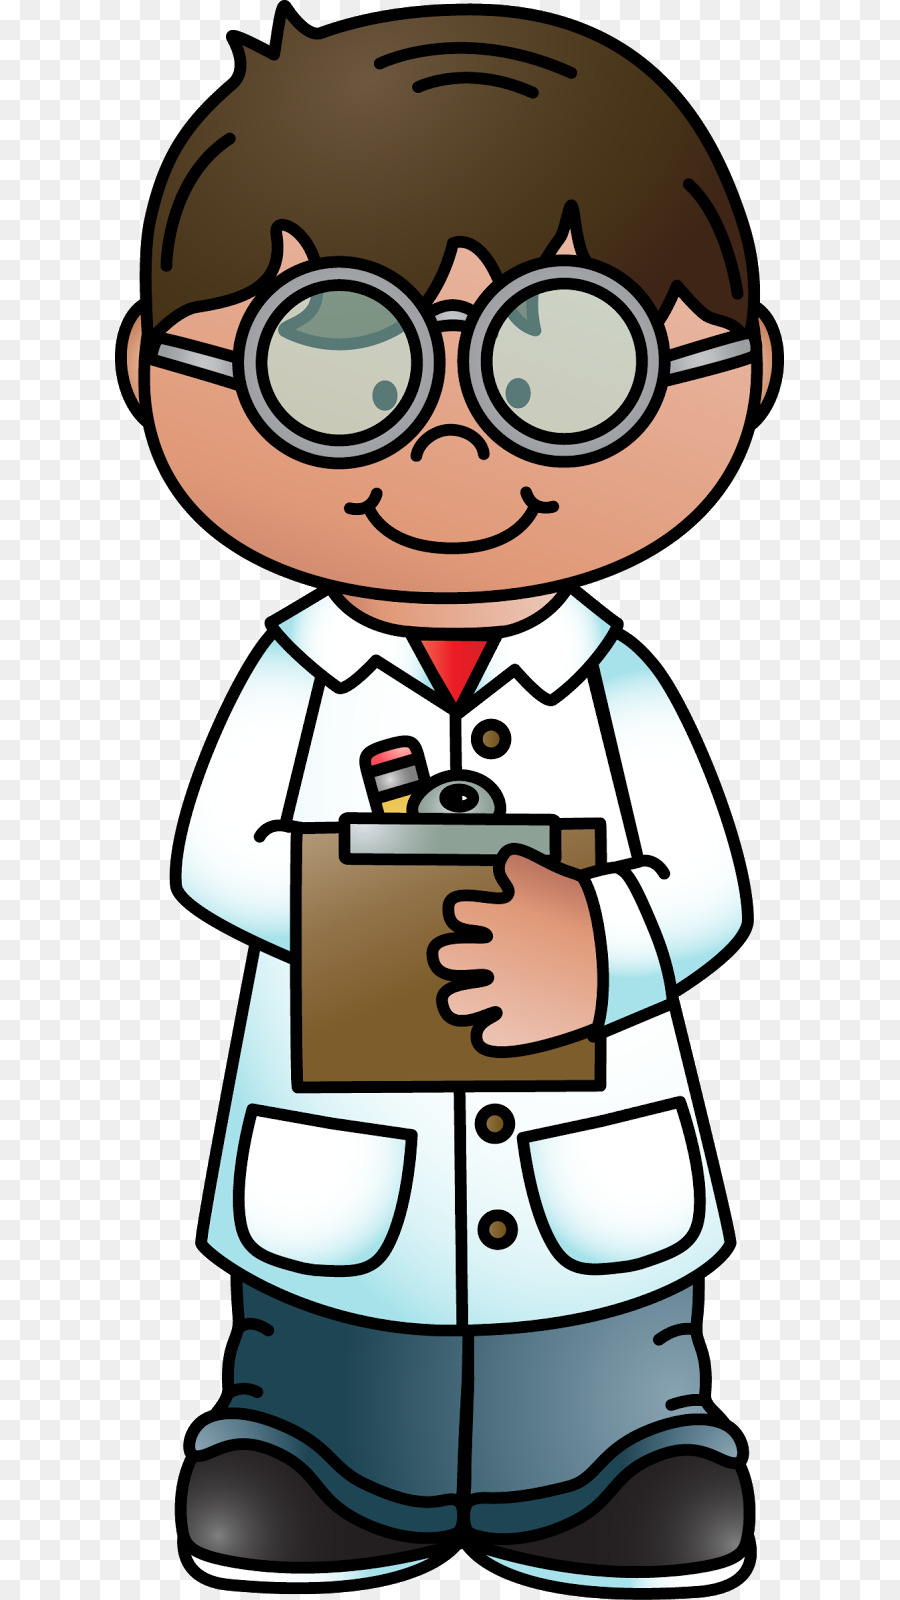 Physical science Scientist Technology Clip art - Scientists Cliparts Melonheadz png download - 669*1600 - Free Transparent Science png Download.